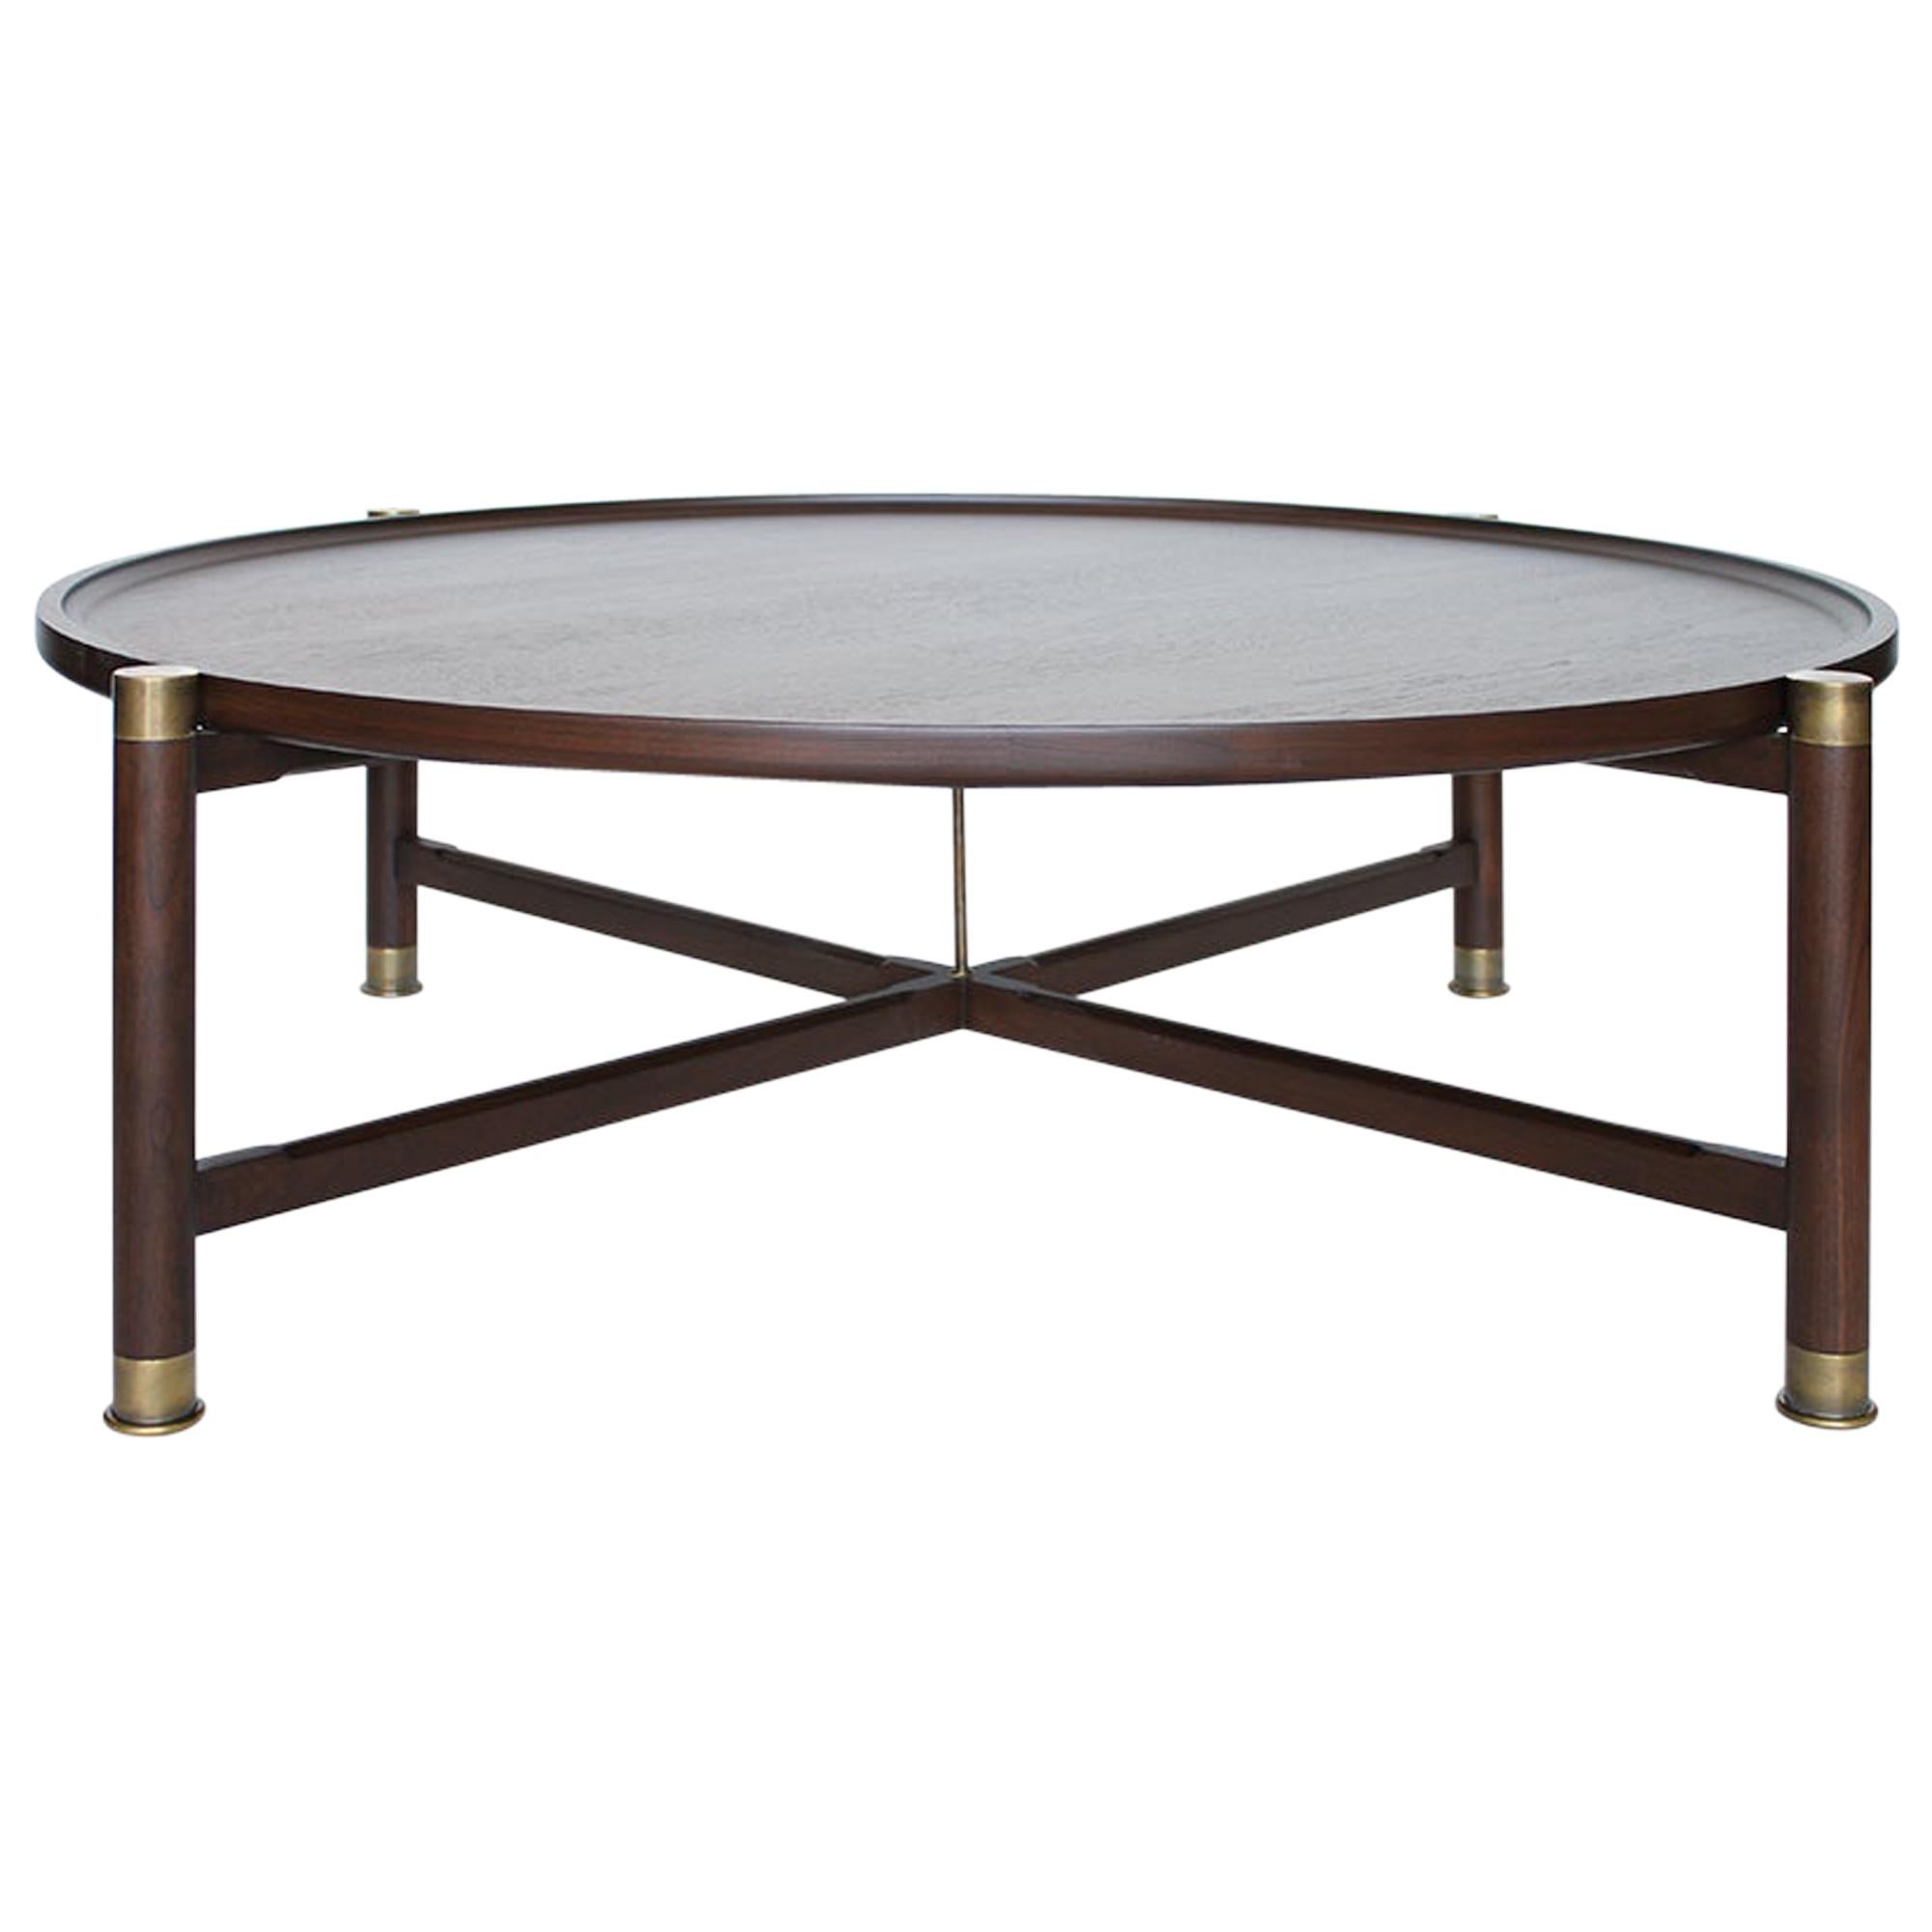 Otto Round Coffee Table in Medium Walnut with Antique Brass Fittings and Stem